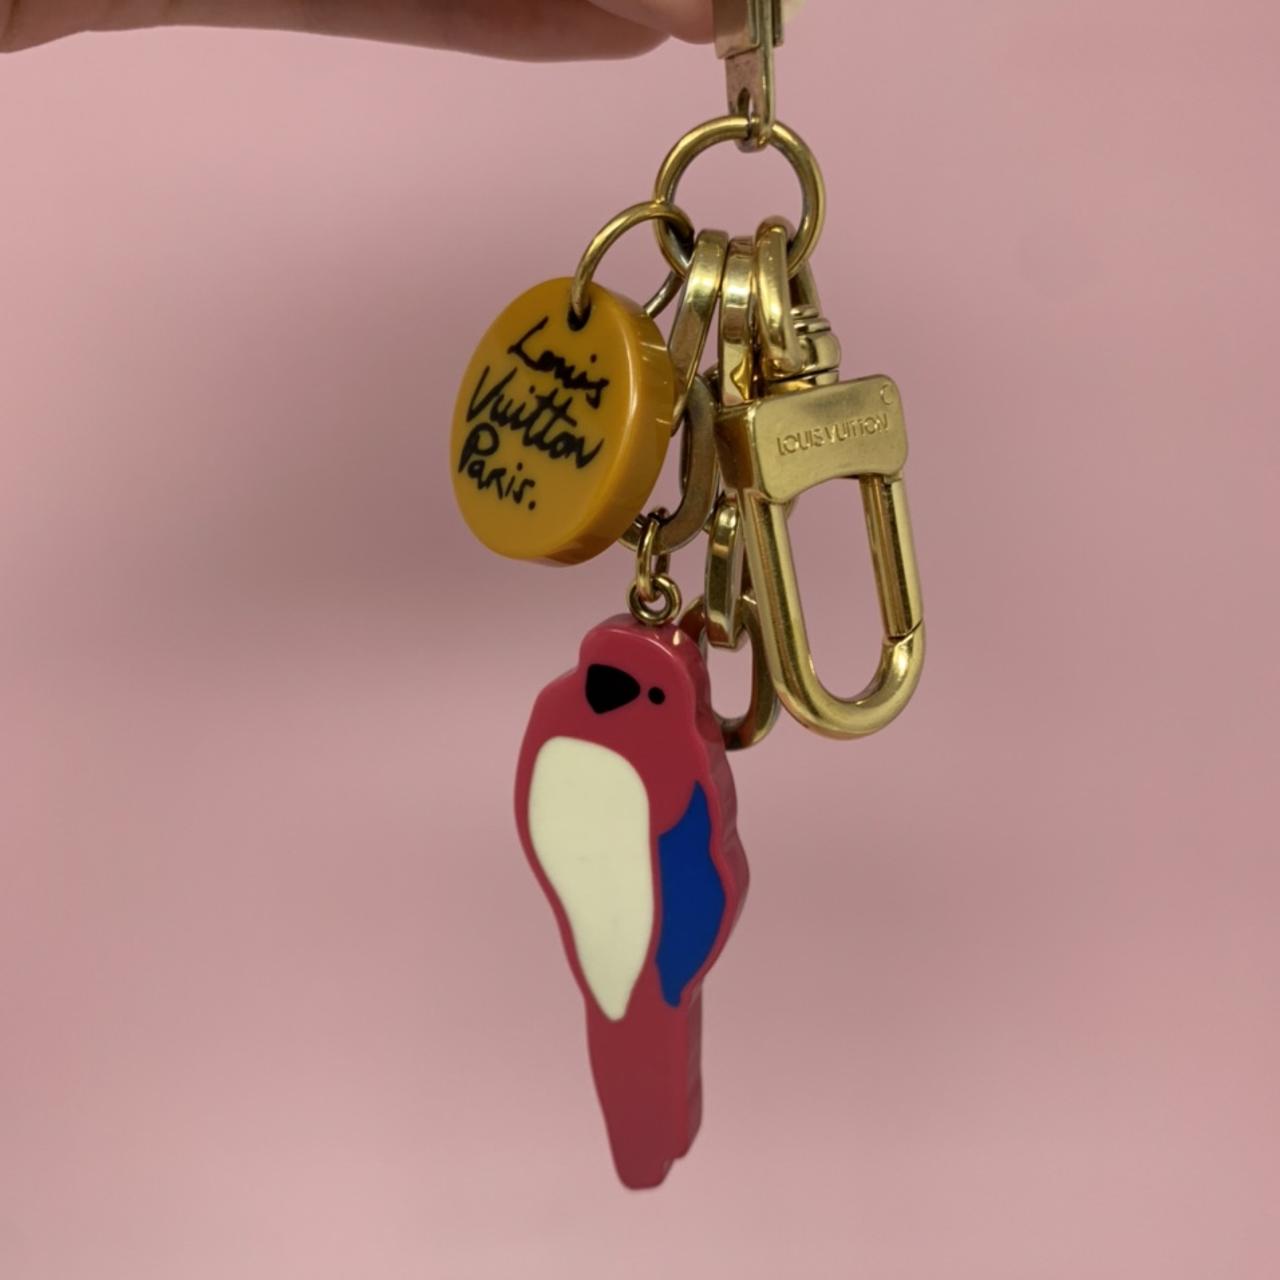 Authentic Louis Vuitton Lock and Key set in very - Depop